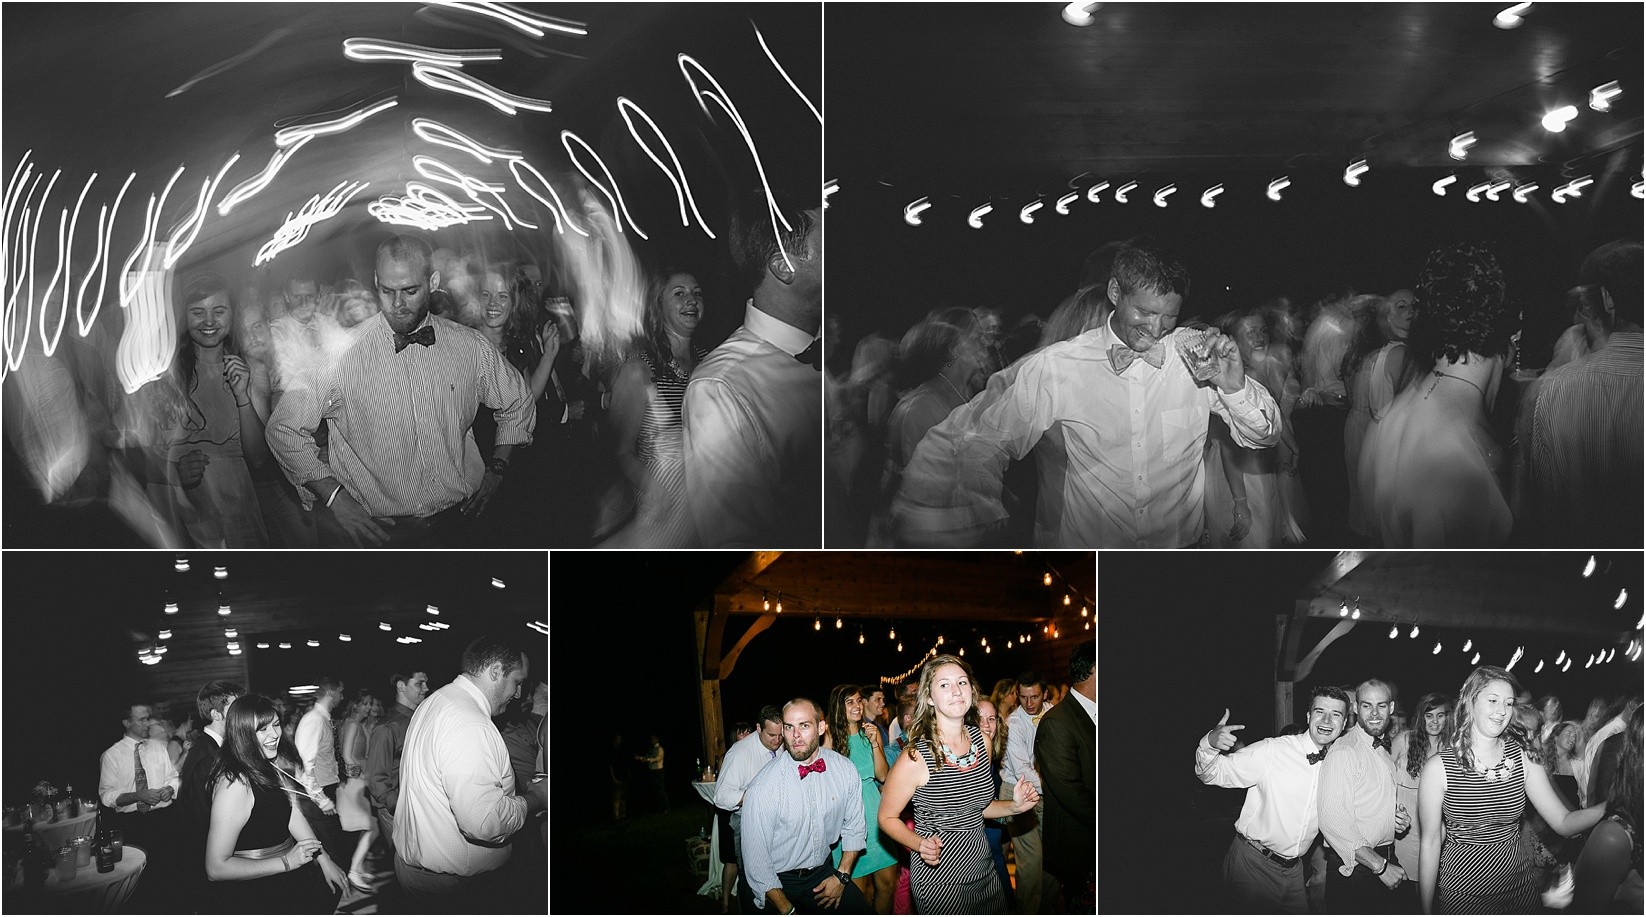 dancing during their wedding at the Historic Rural Hill wedding ceremony and reception in Huntersville nc